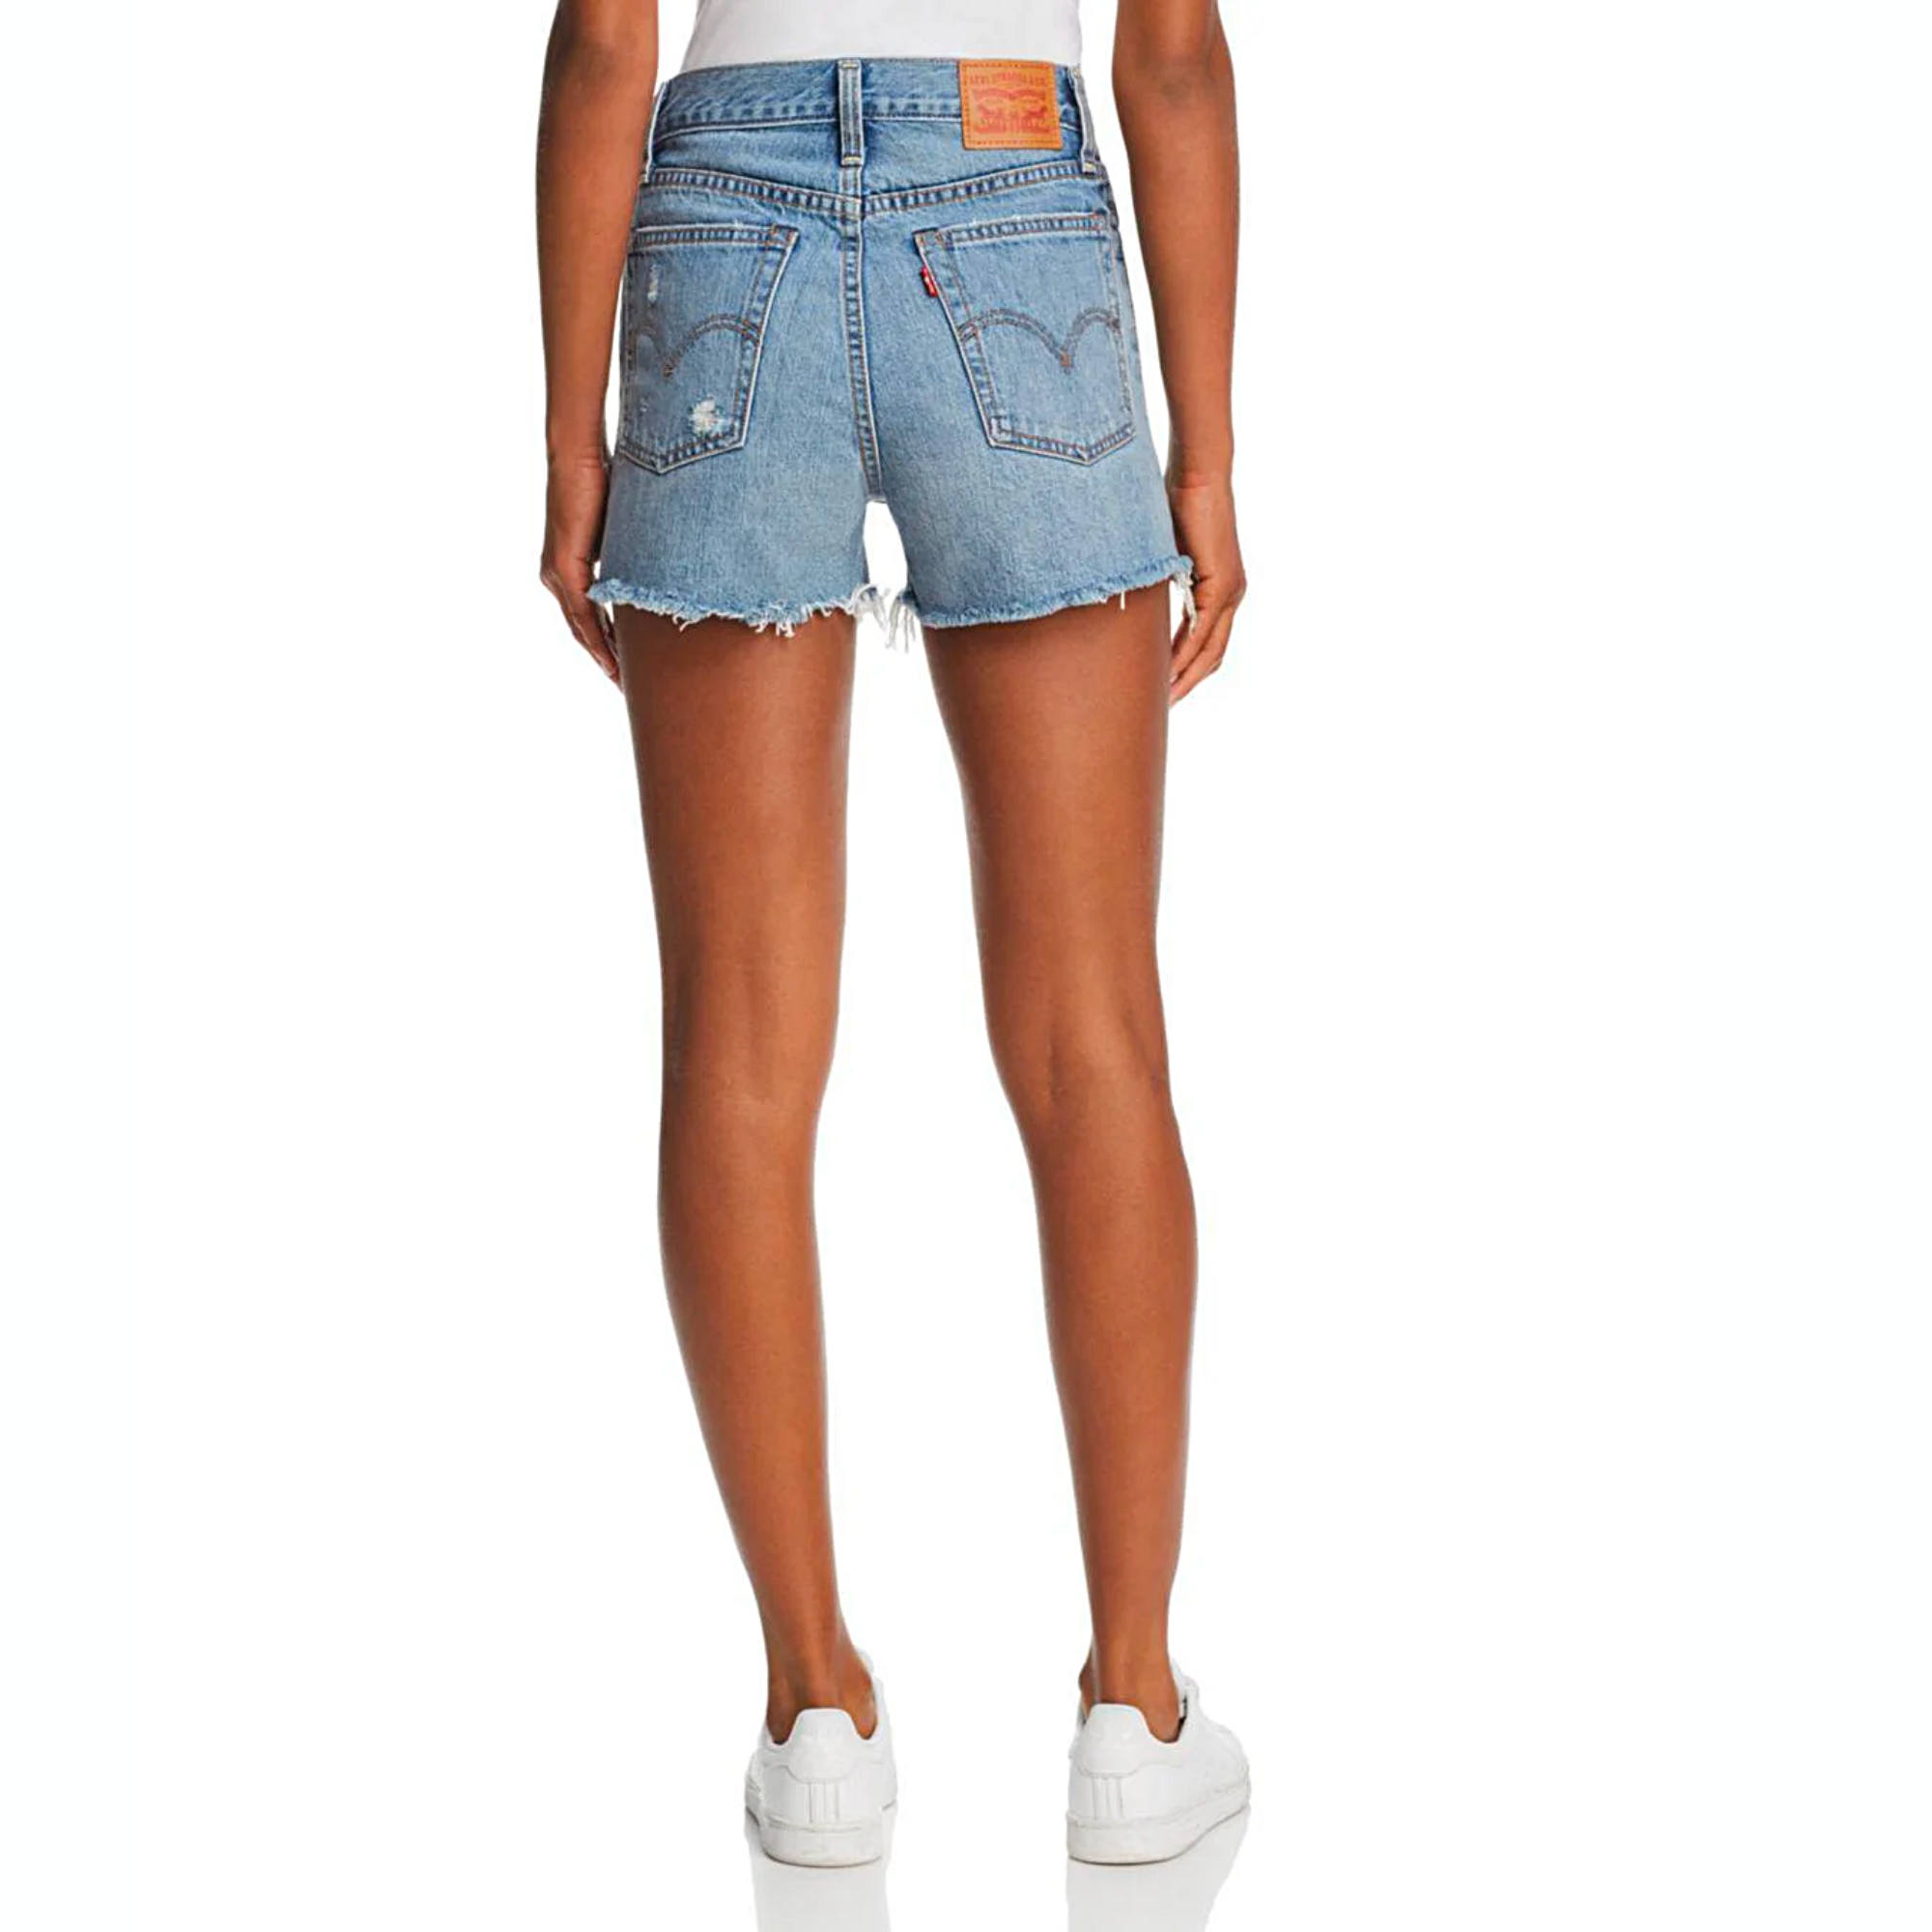 Levi's Premium Wedgie Jean Shorts in Blue Your Mind – Farewell Exchange